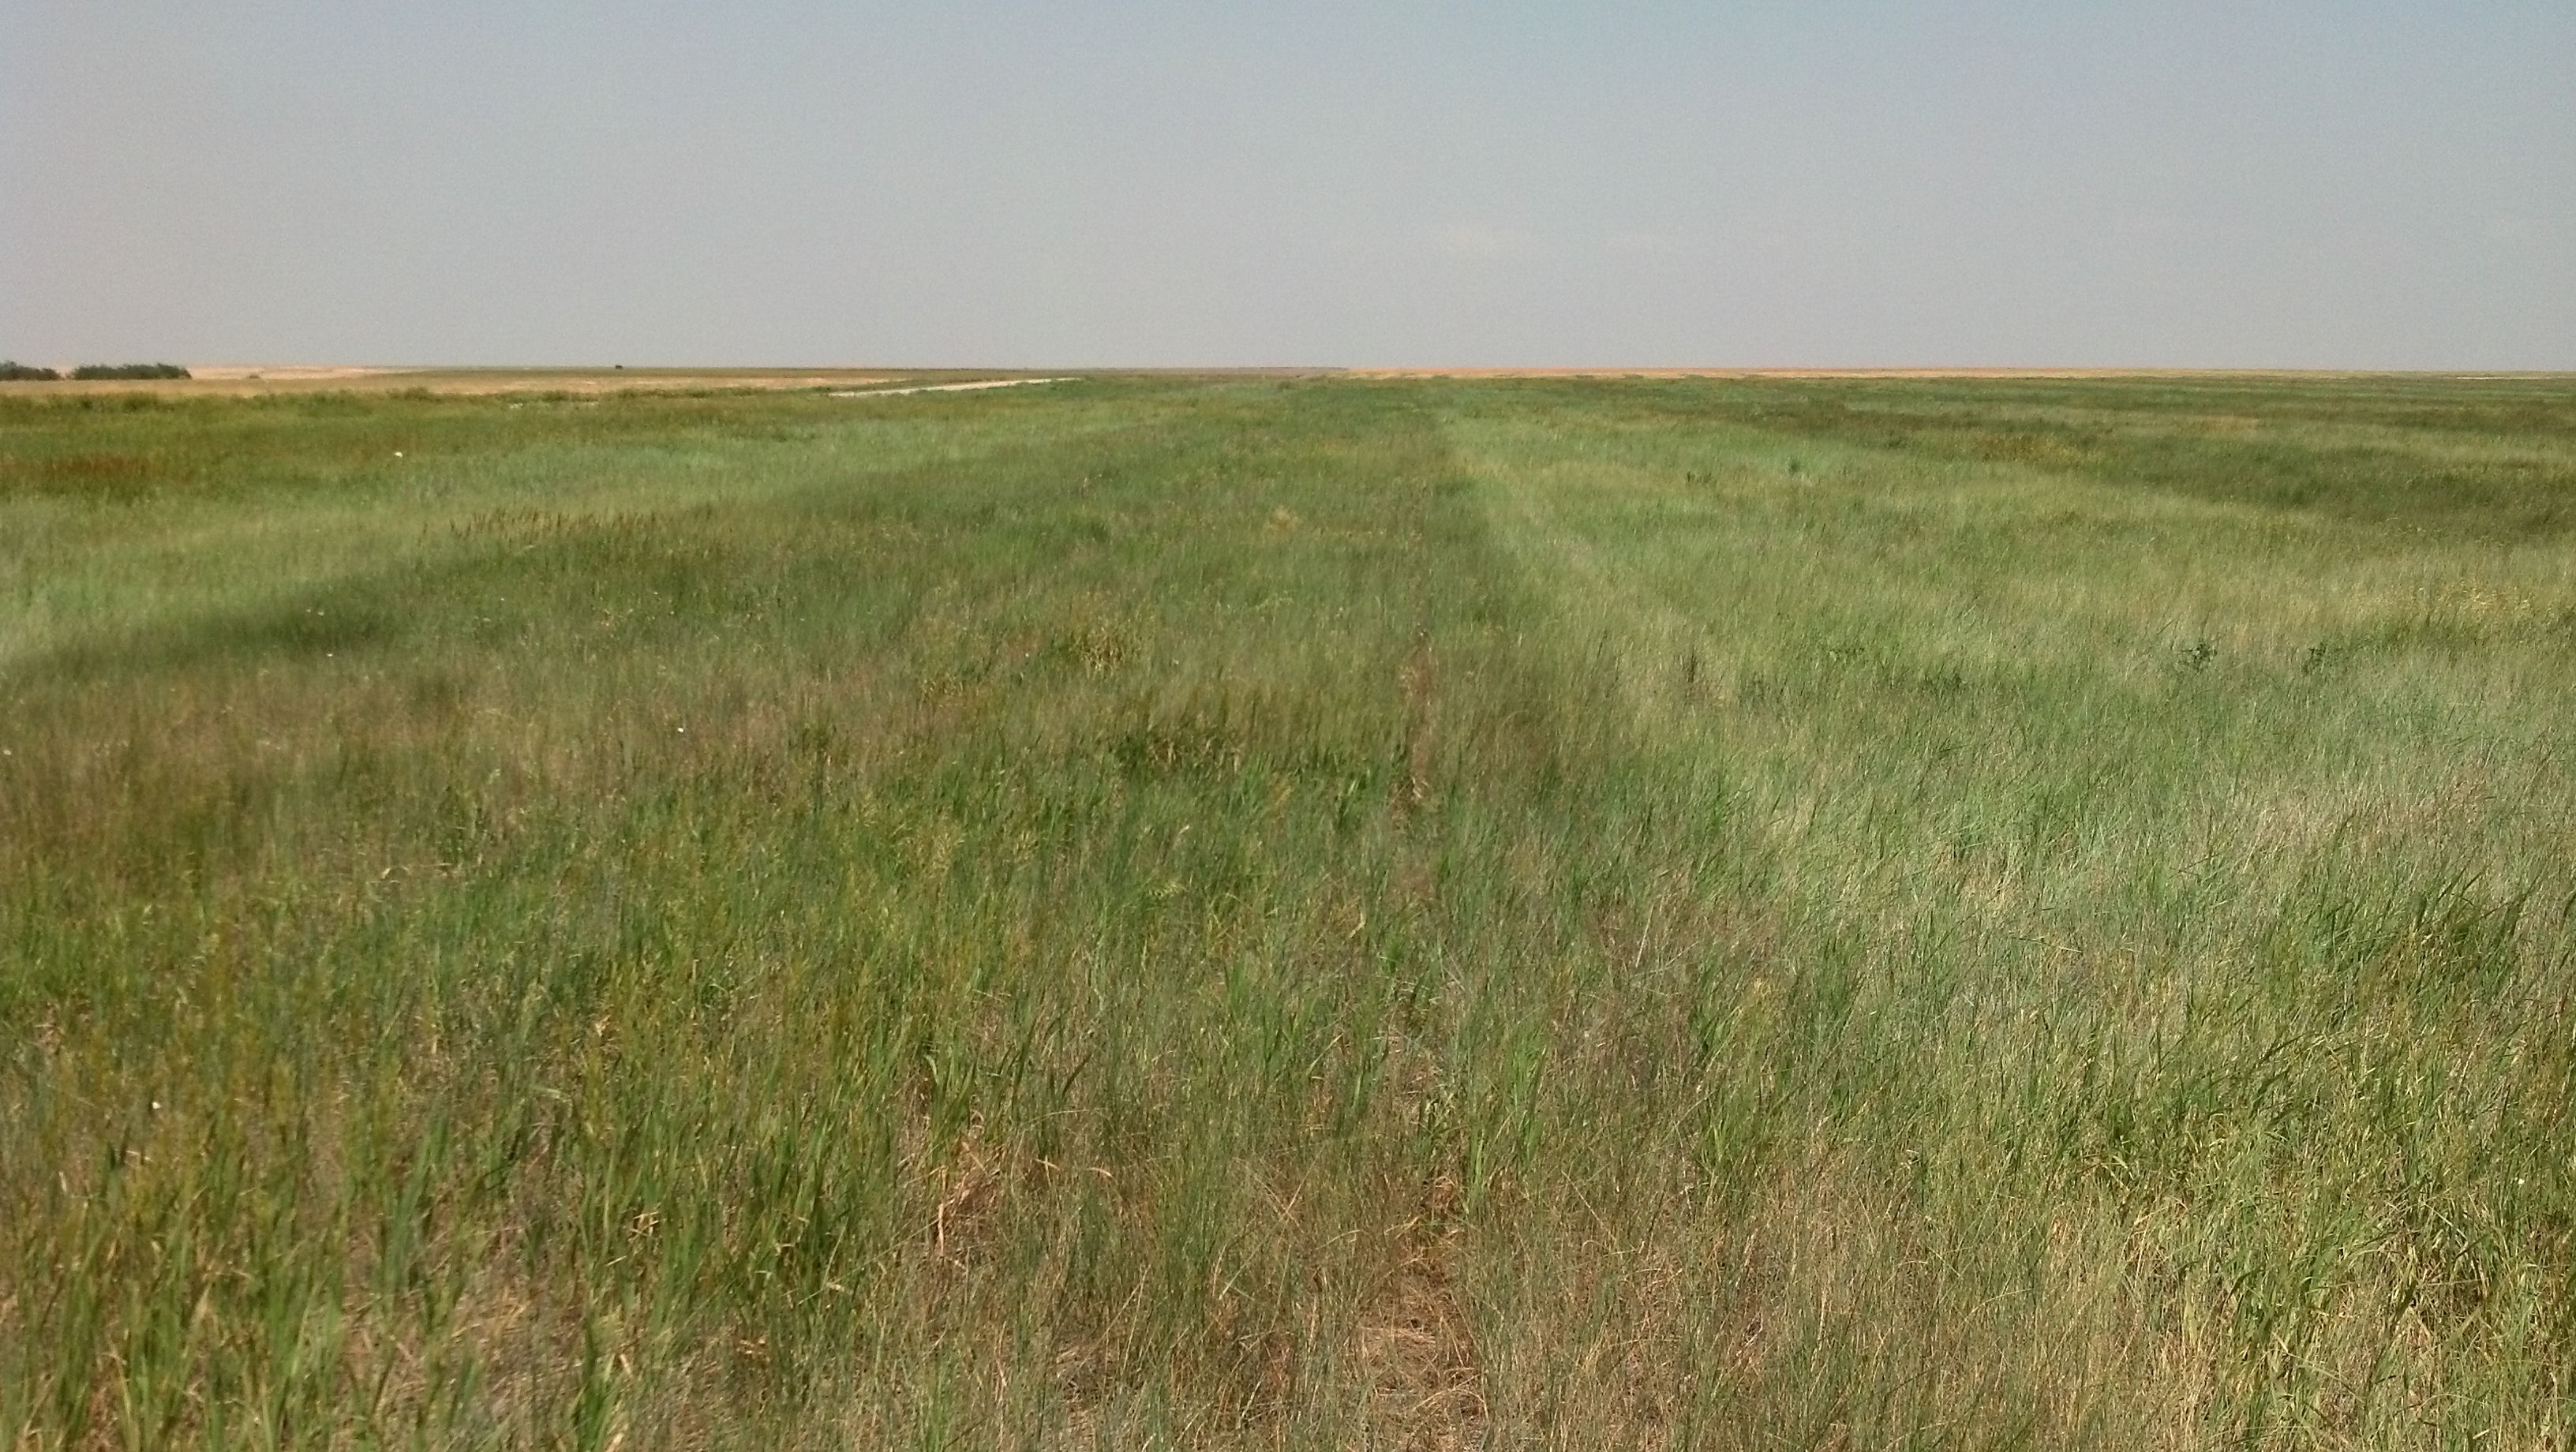 Item 15 in SOLD!! 160+/- Acres Ness Co. KS gallery